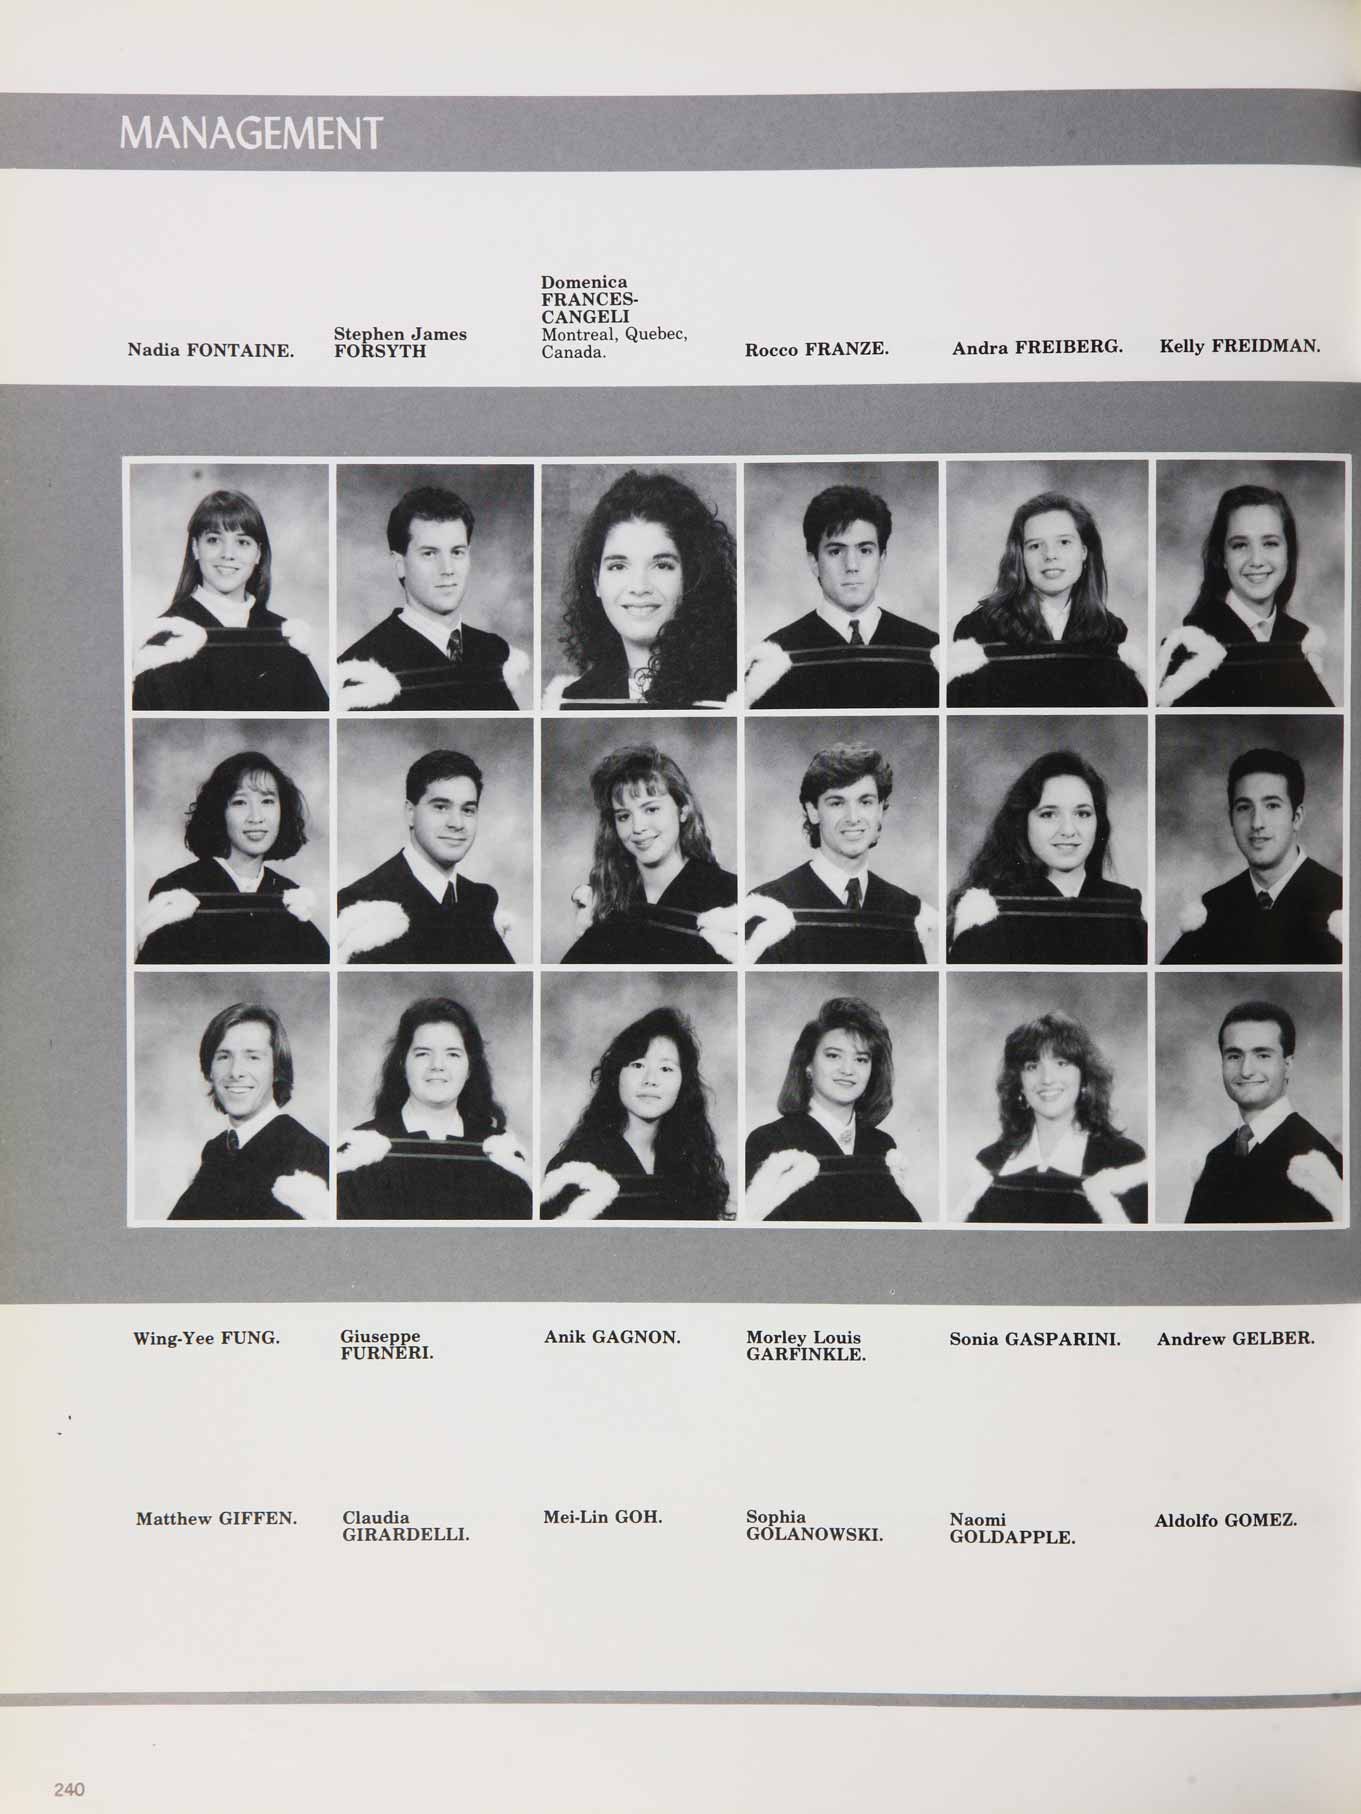 McGill Yearbook: 1991